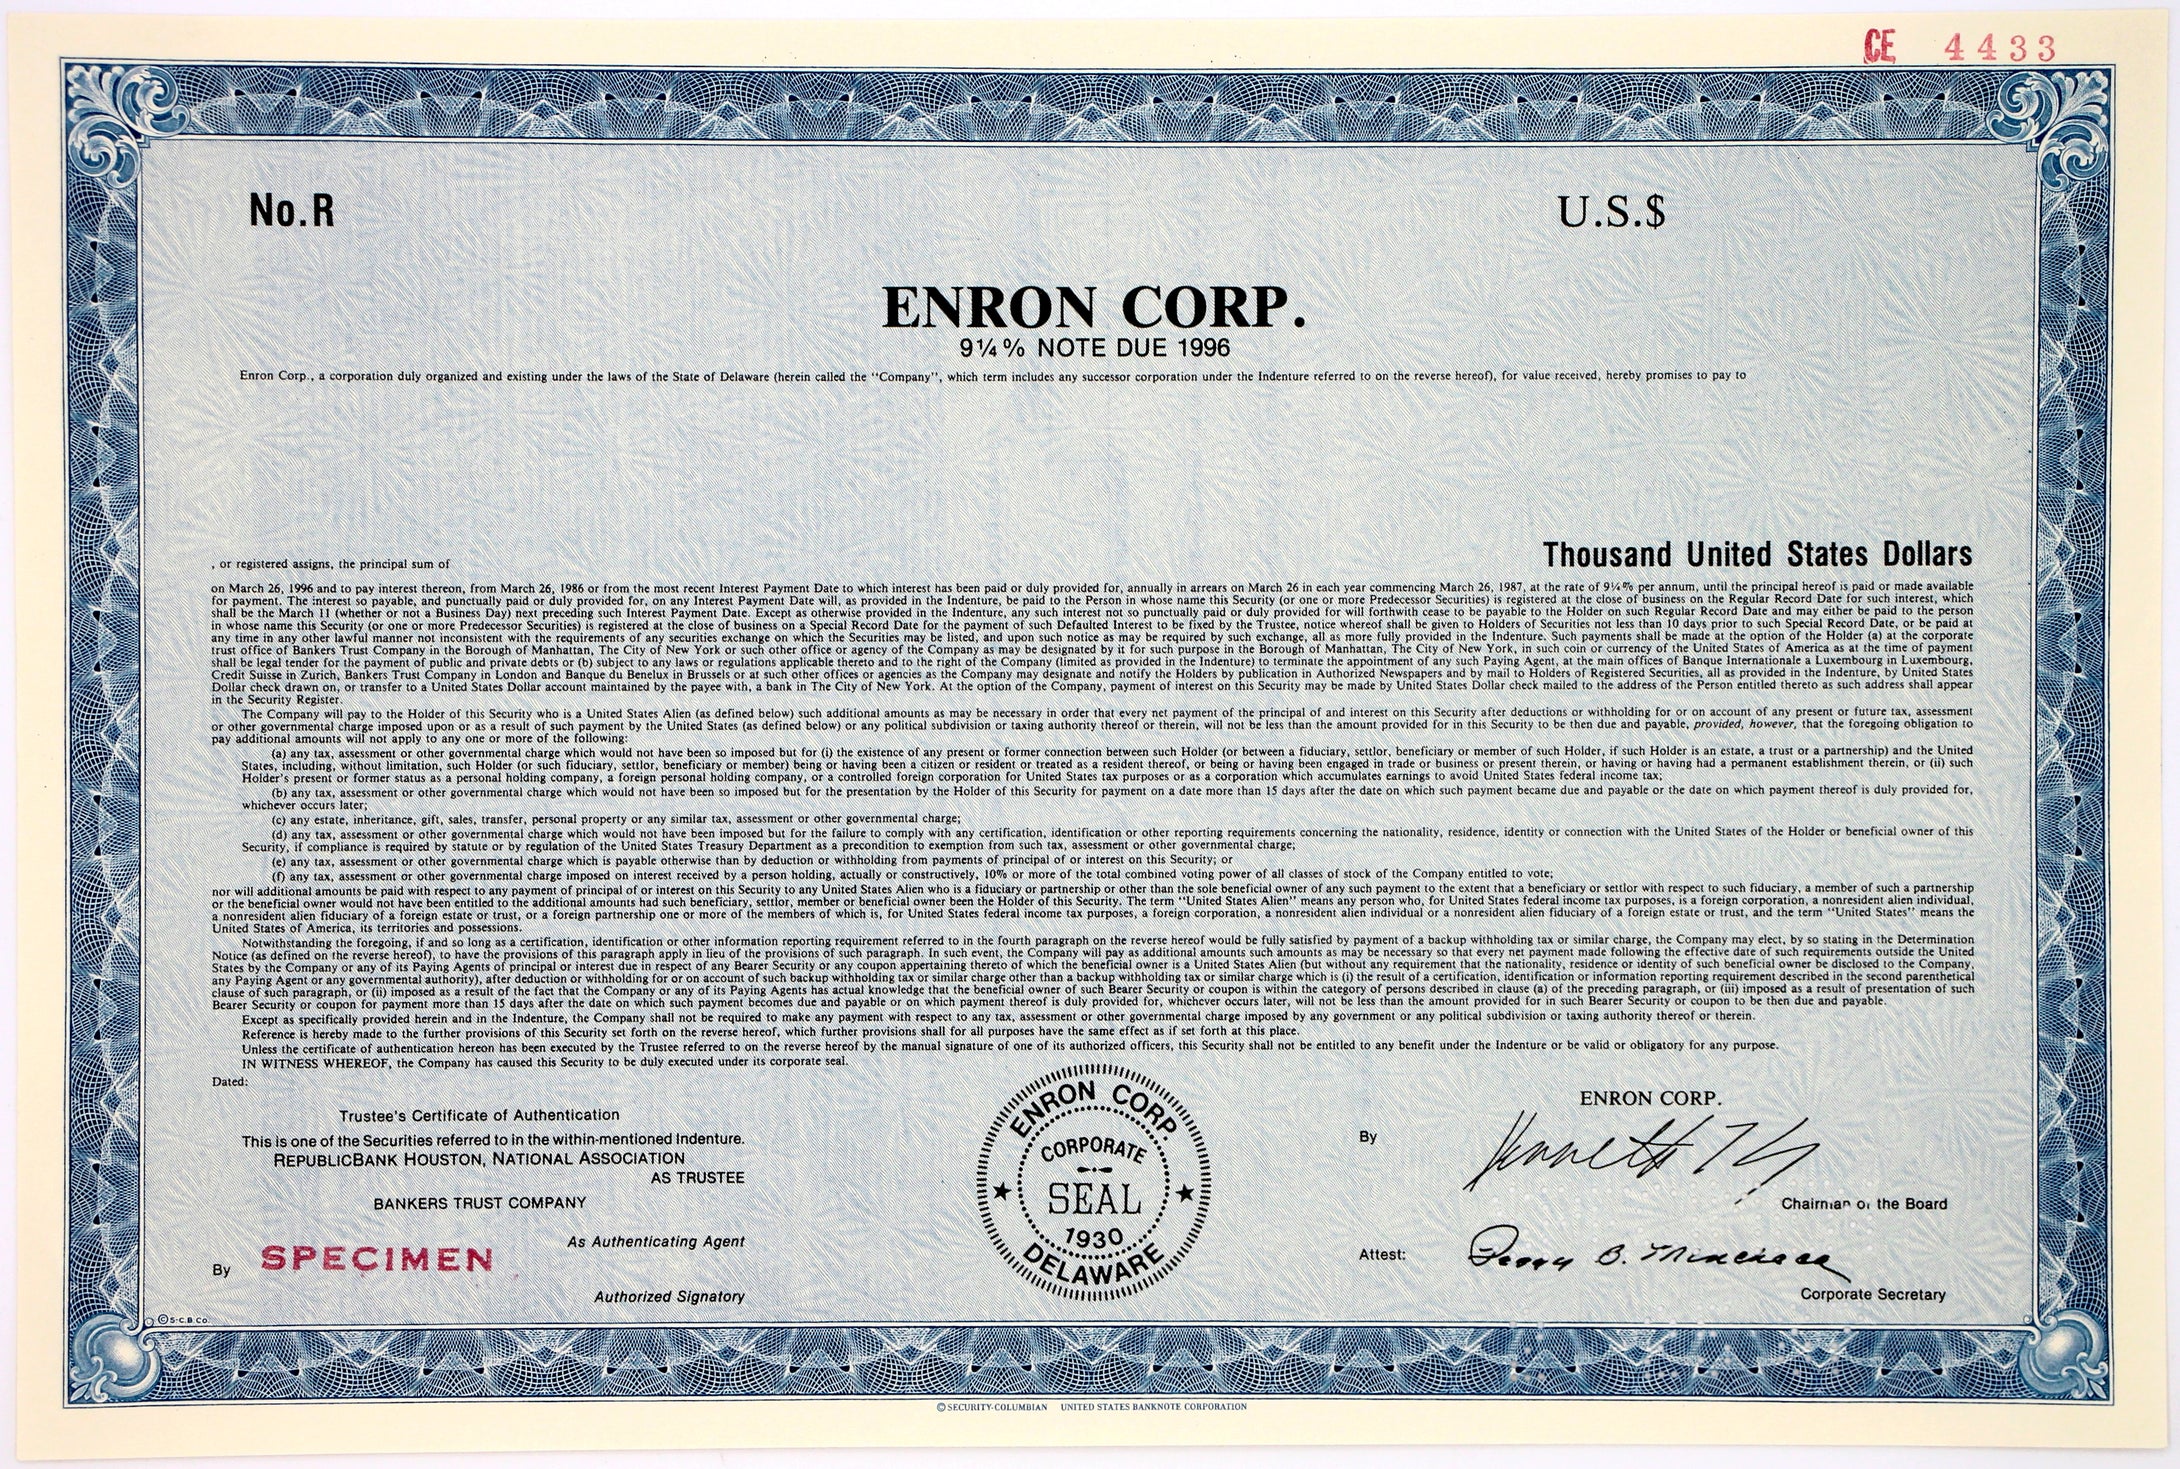 Enron Corp. Specimen Bond Certificate - 1986 - With Kenneth Lay's Printed Signature - Wall Street Treasures